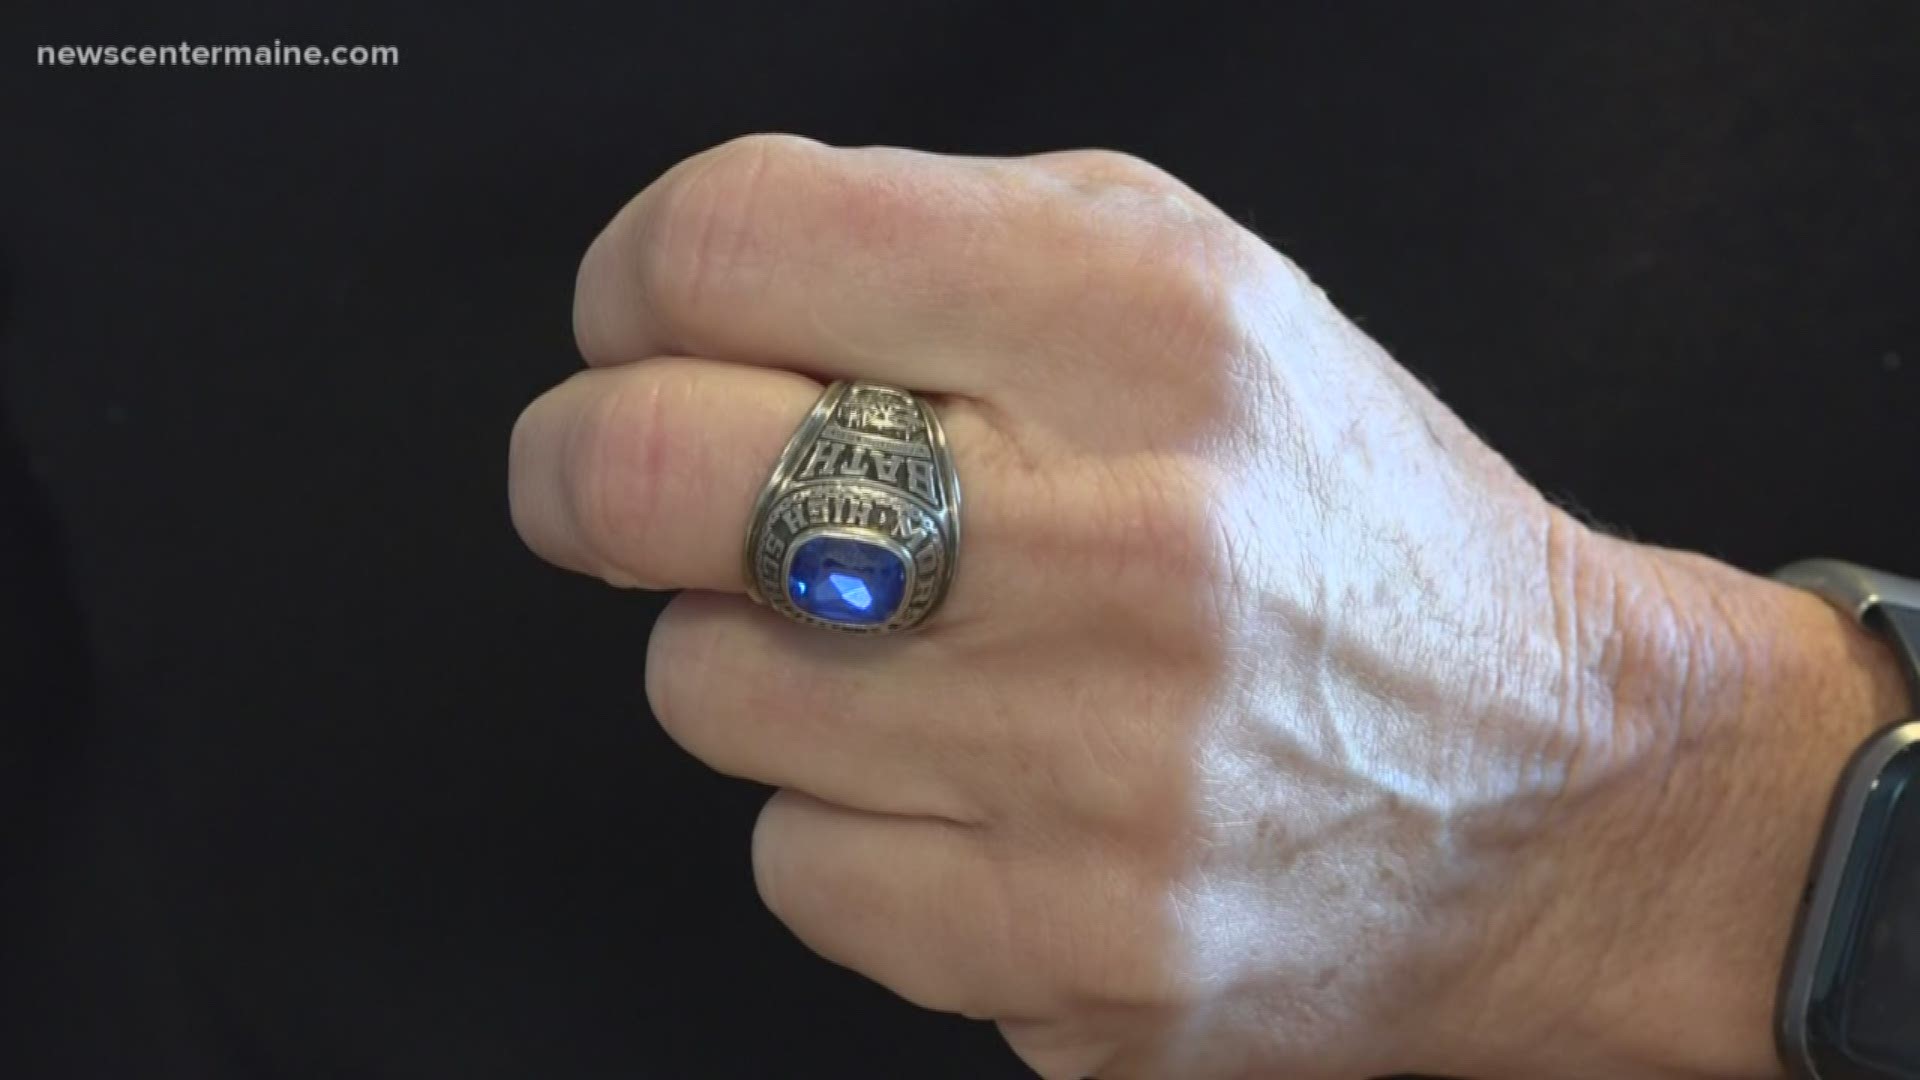 Bath woman finds class ring